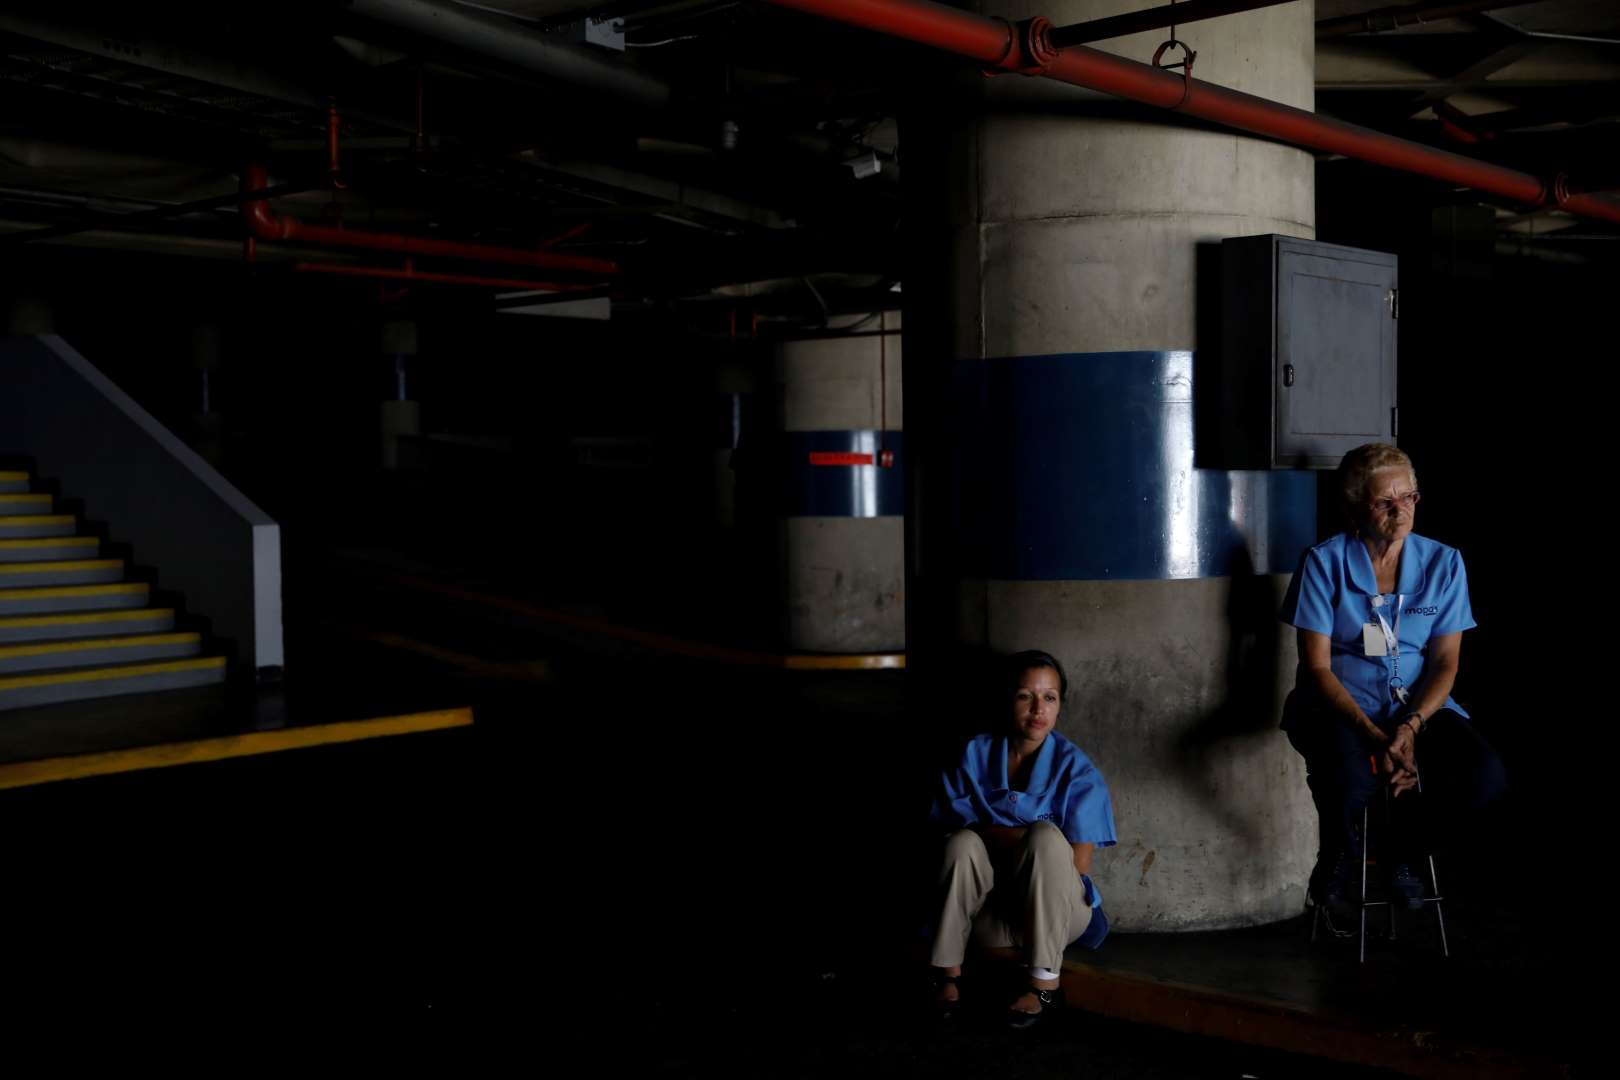 Venezuela Plunged Into Second Blackout Within 20 Days Of The First